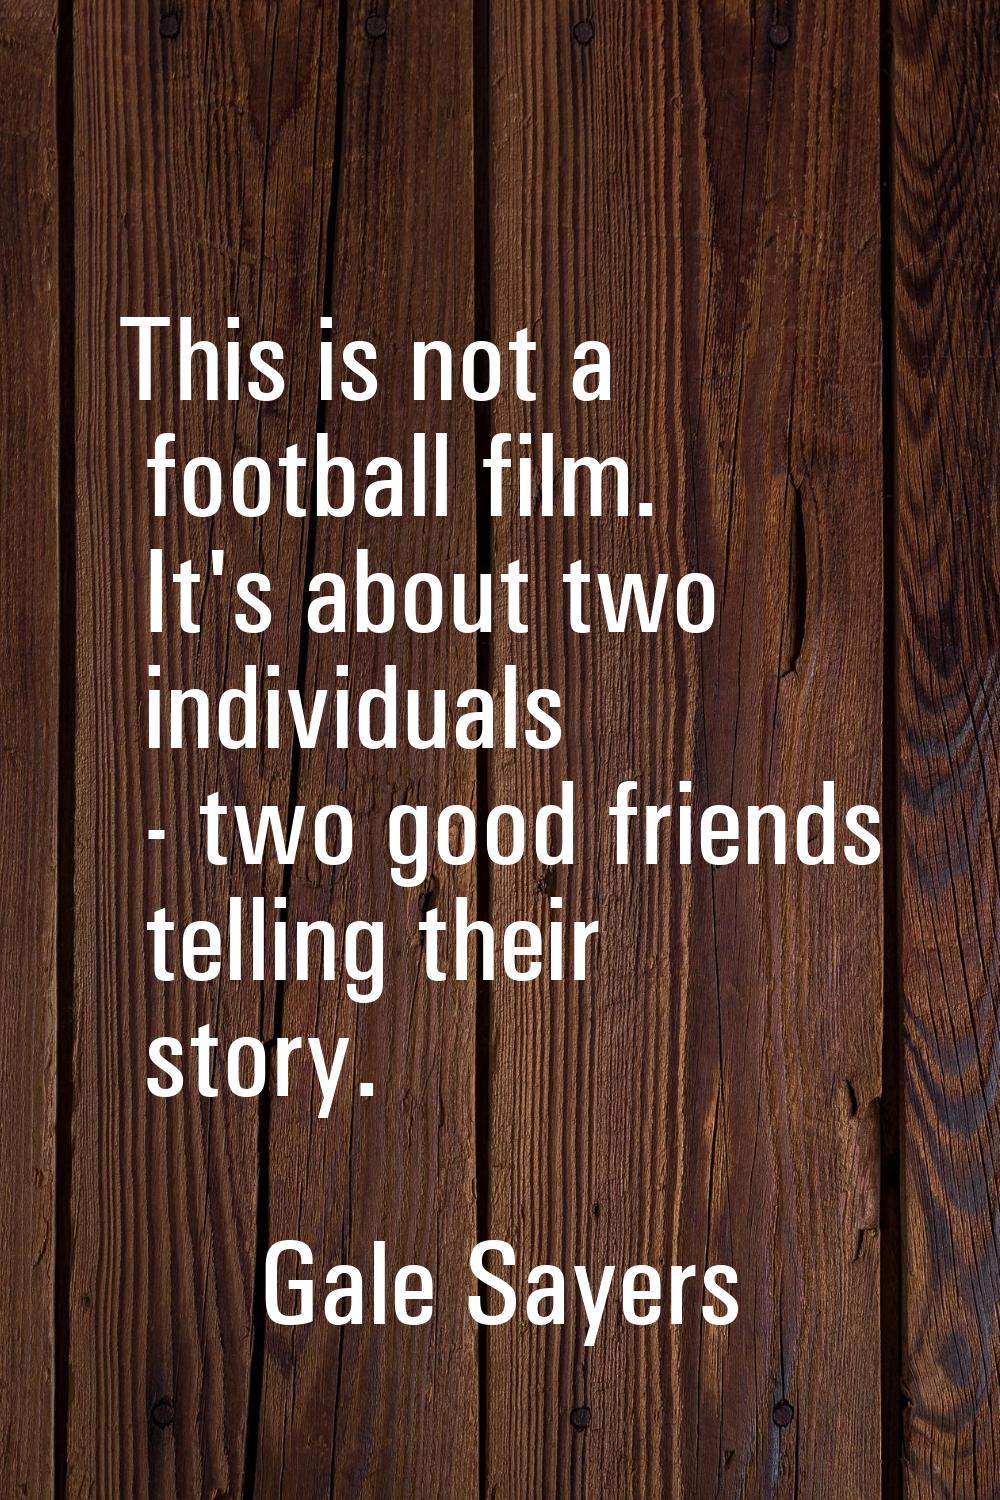 This is not a football film. It's about two individuals - two good friends telling their story.